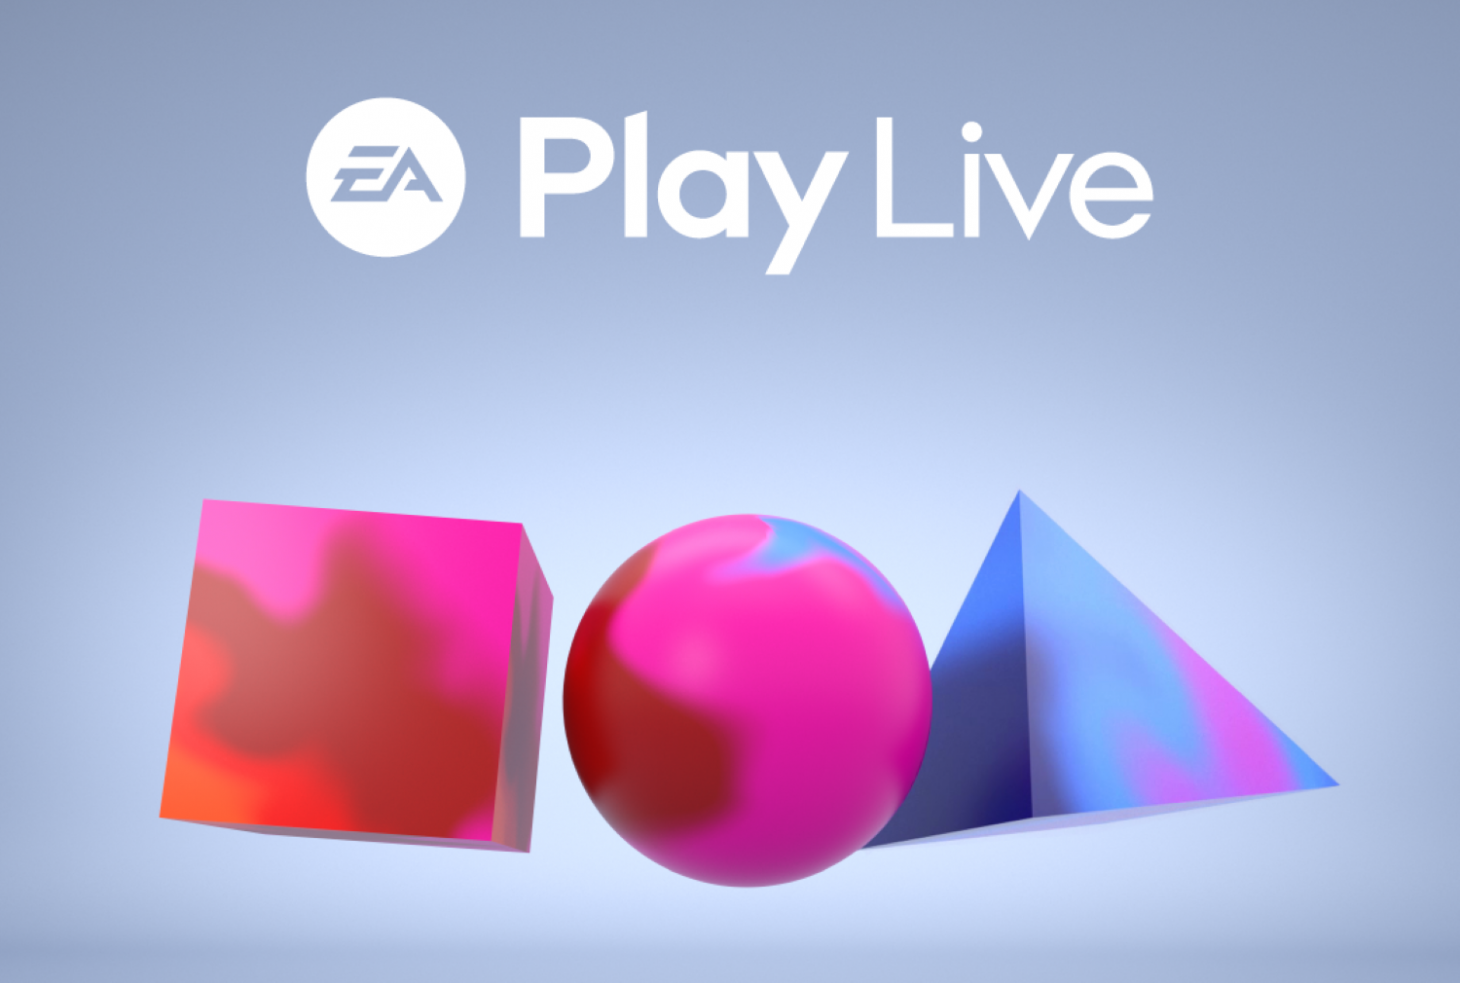 EA Play Live Runtime Confirmed At 40 Minutes Gameranx